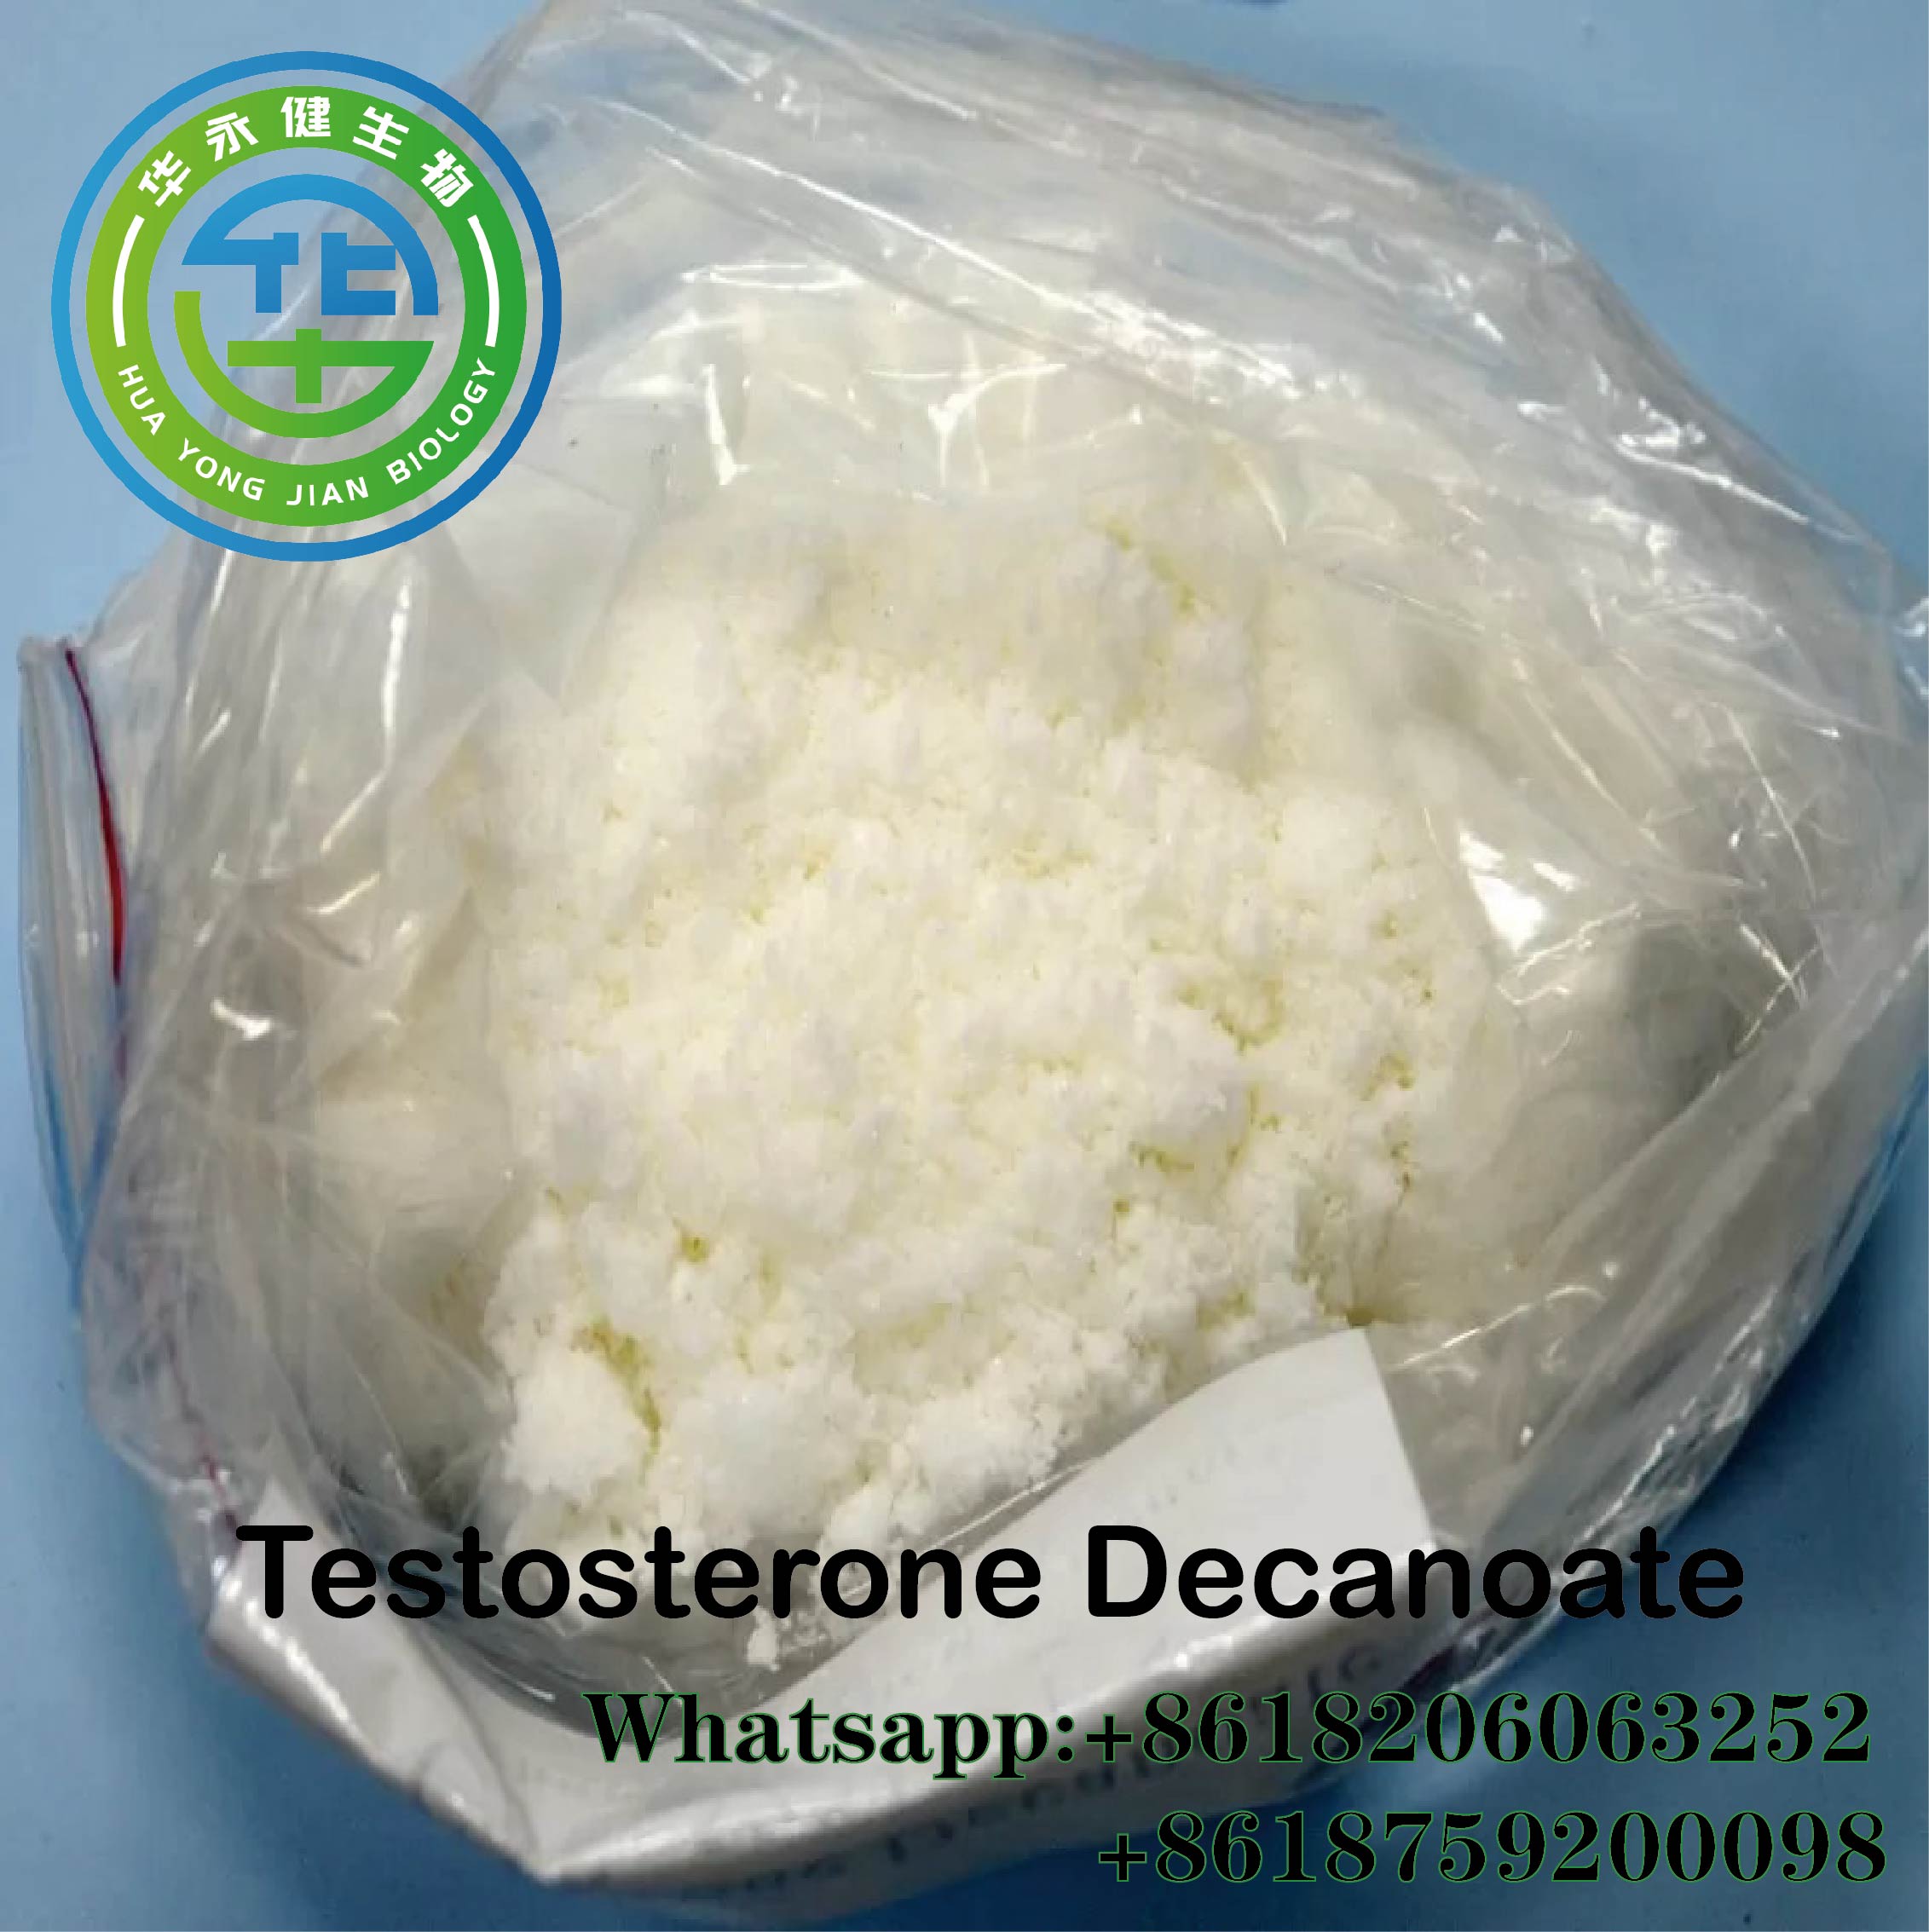 Burning Fat Test Decanoate Medical Anabolics Material Muscle Strength Pharmaceutical Testosterone Decanoate Raw Powder